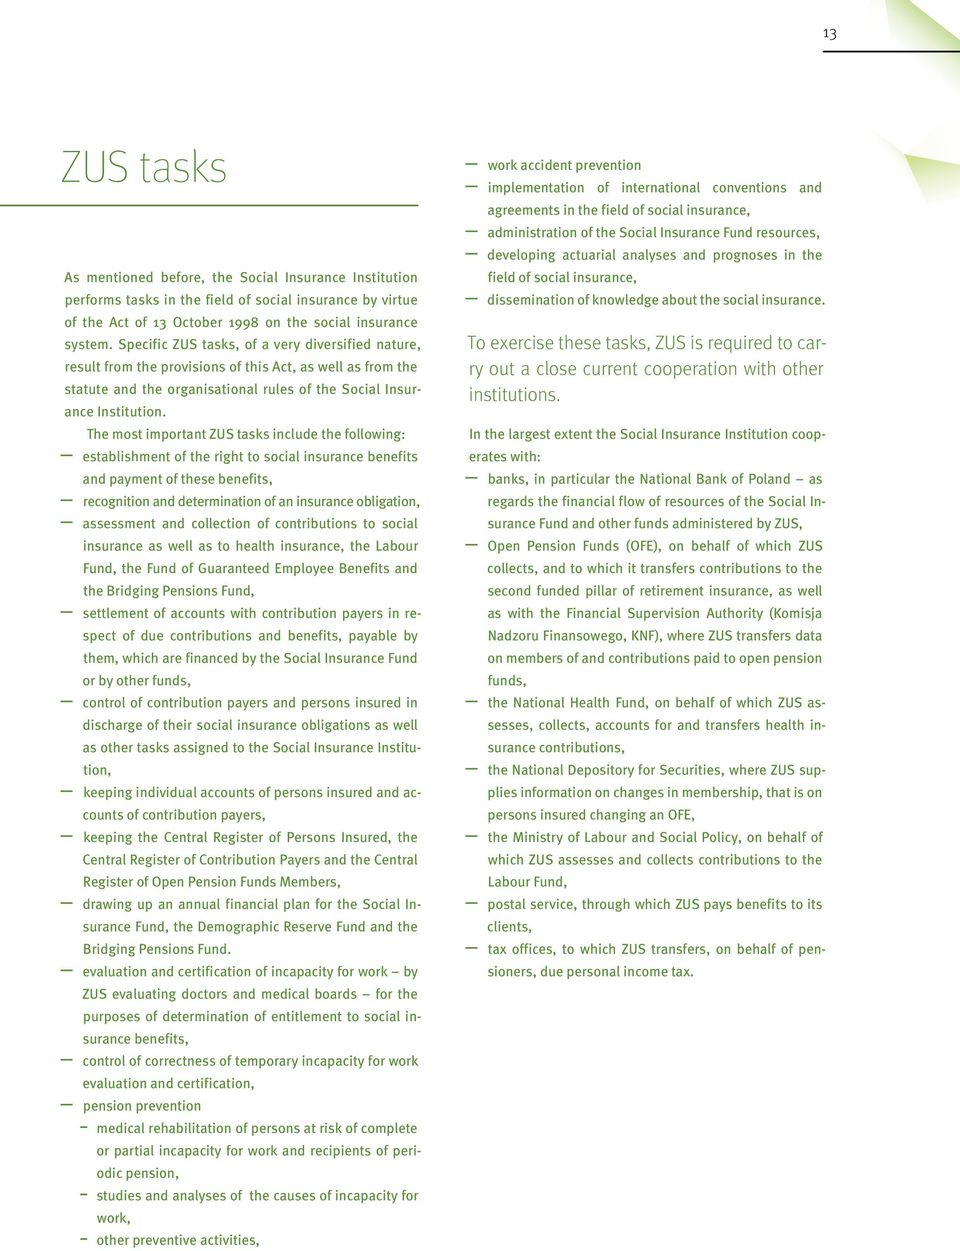 The most important ZUS tasks include the following: establishment of the right to social insurance benefits and payment of these benefits, recognition and determination of an insurance obligation,